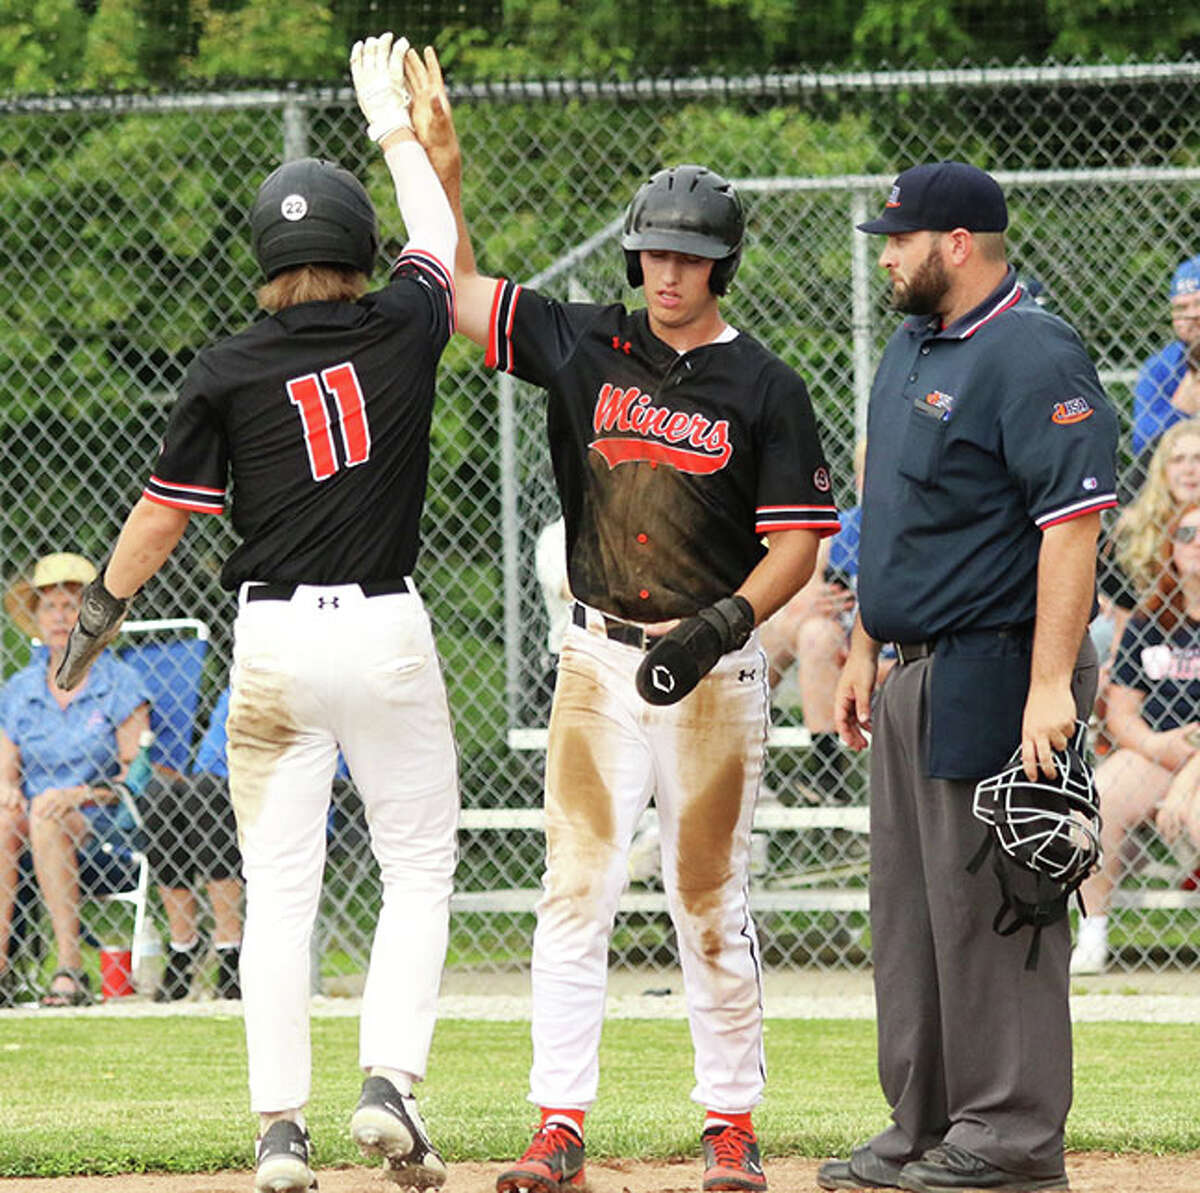 Gillespie's Kamryn Link greets teammate Bryce Buhs (11) after both Miners scored runs in the fourth inning against Carlinville on Thursday in a Class 2A regional semifinal in Gillespie.